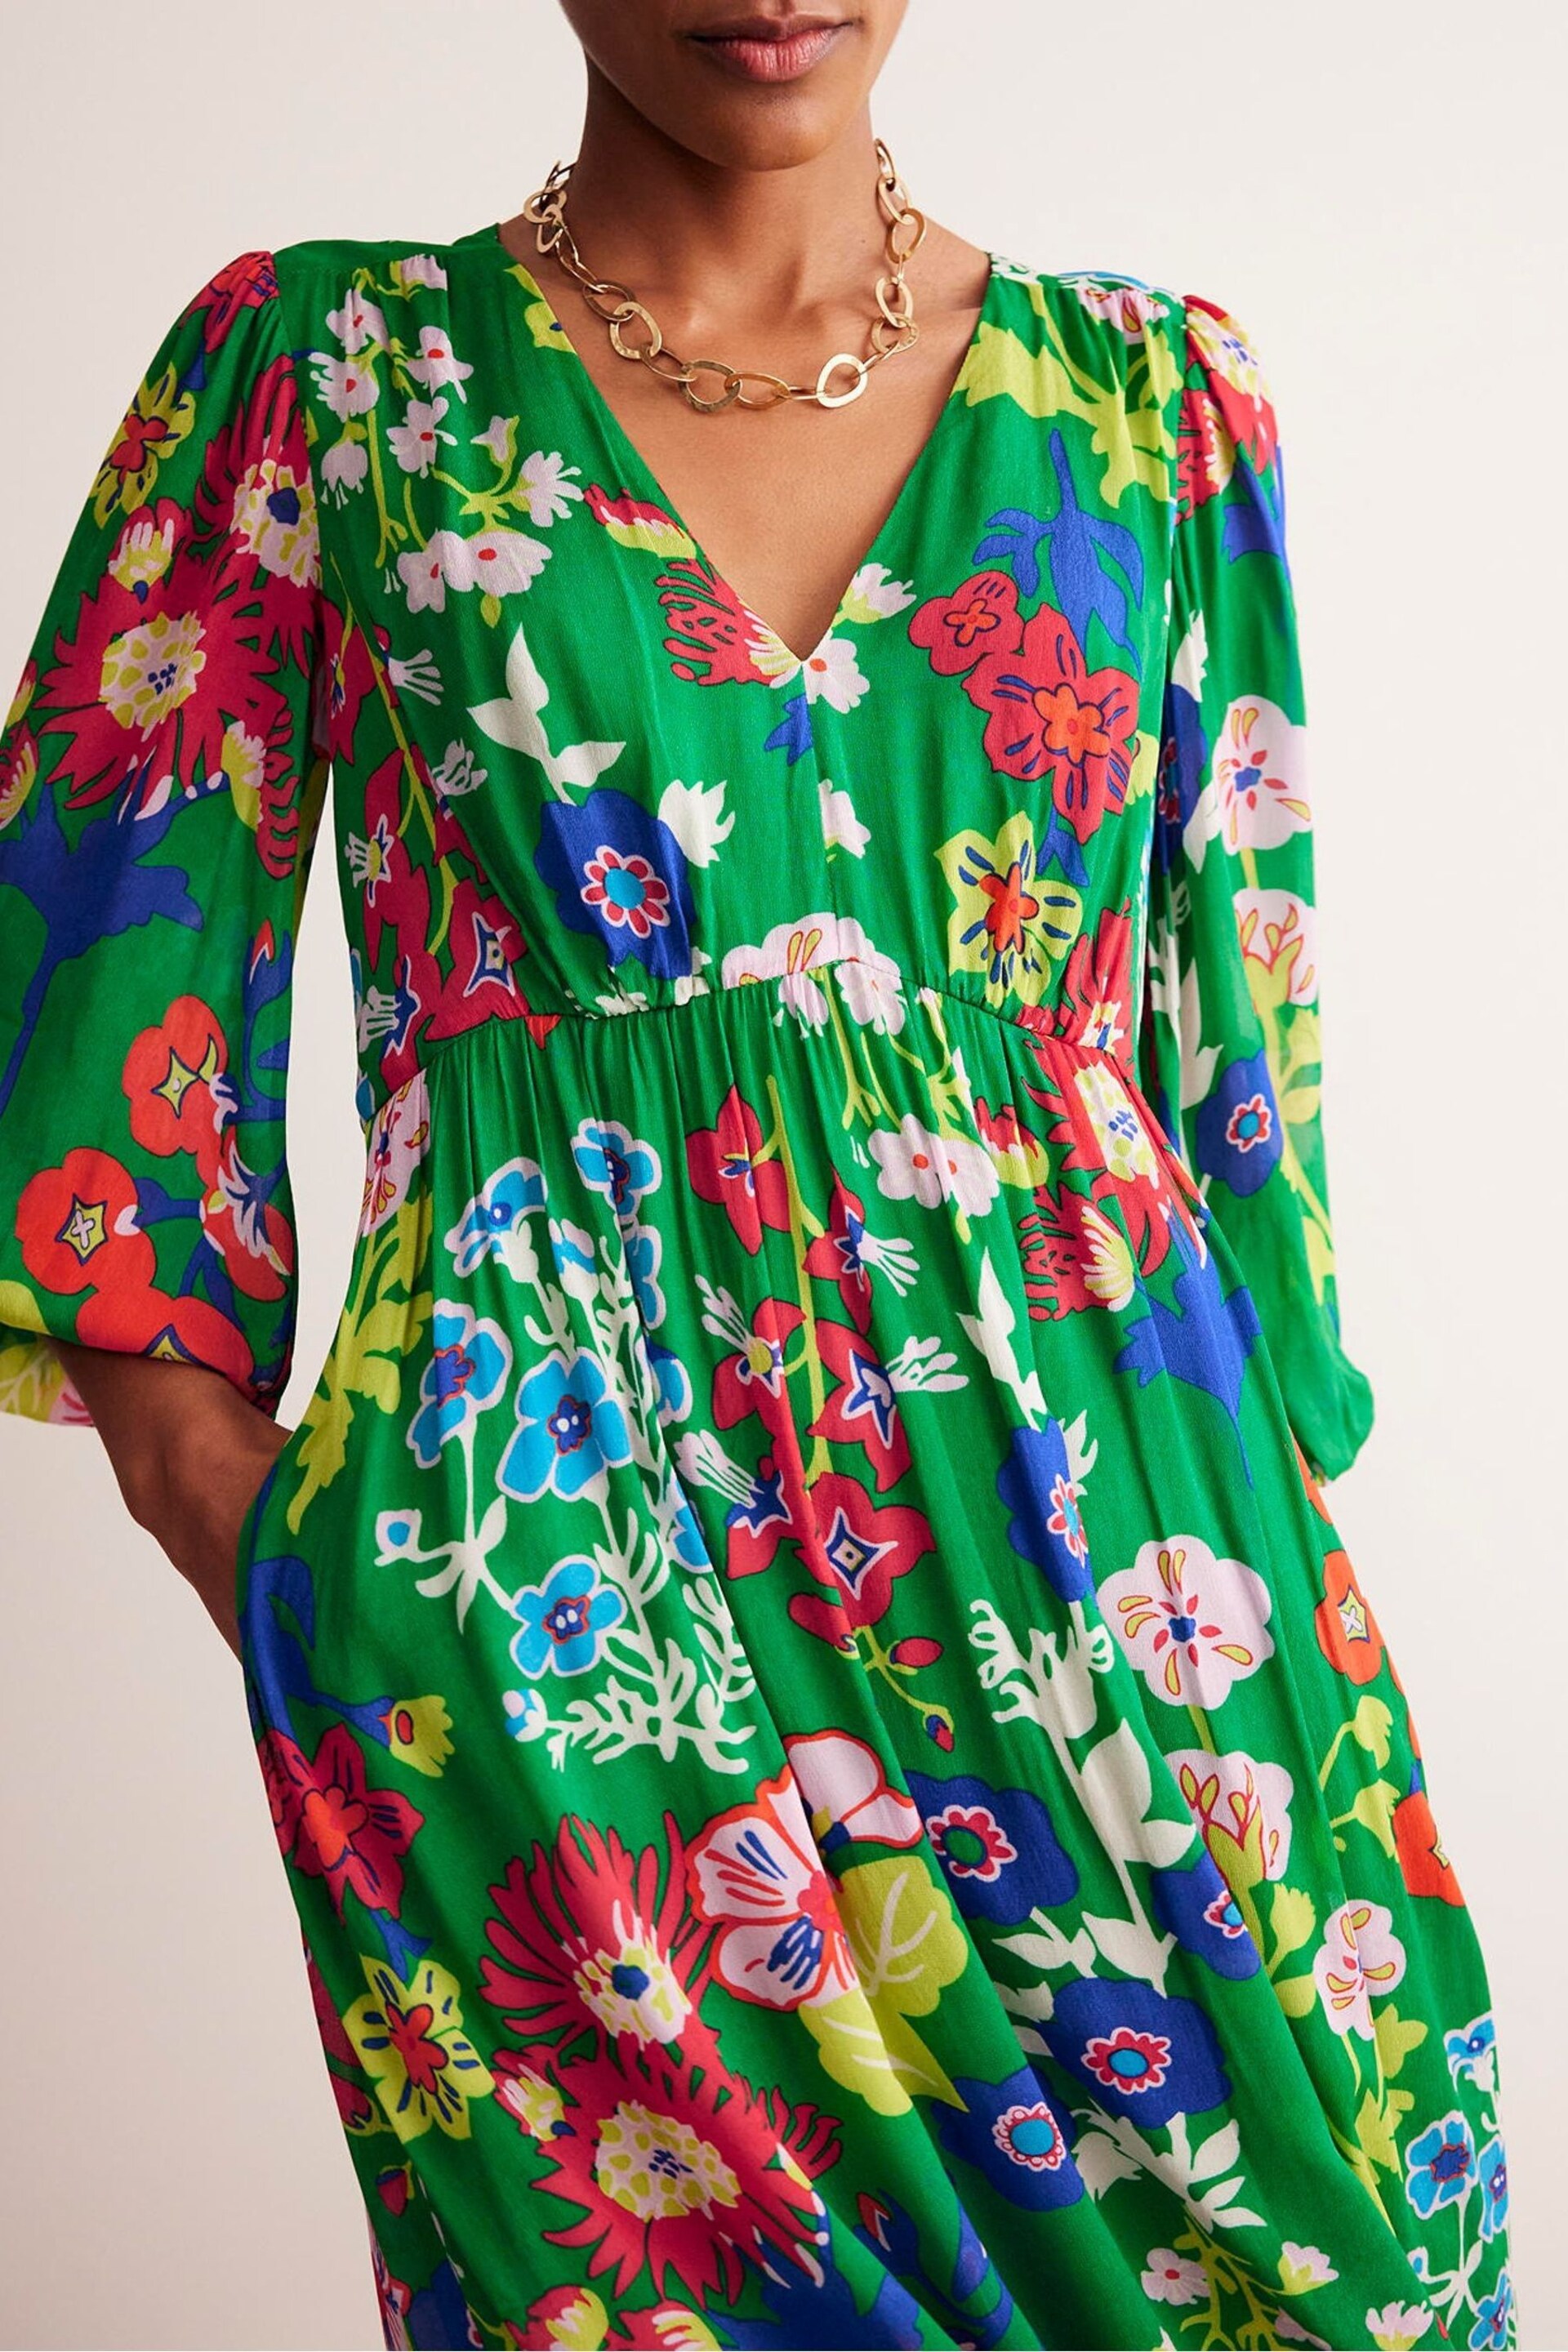 Boden Green V-Neck Puff Maxi Dress - Image 4 of 6